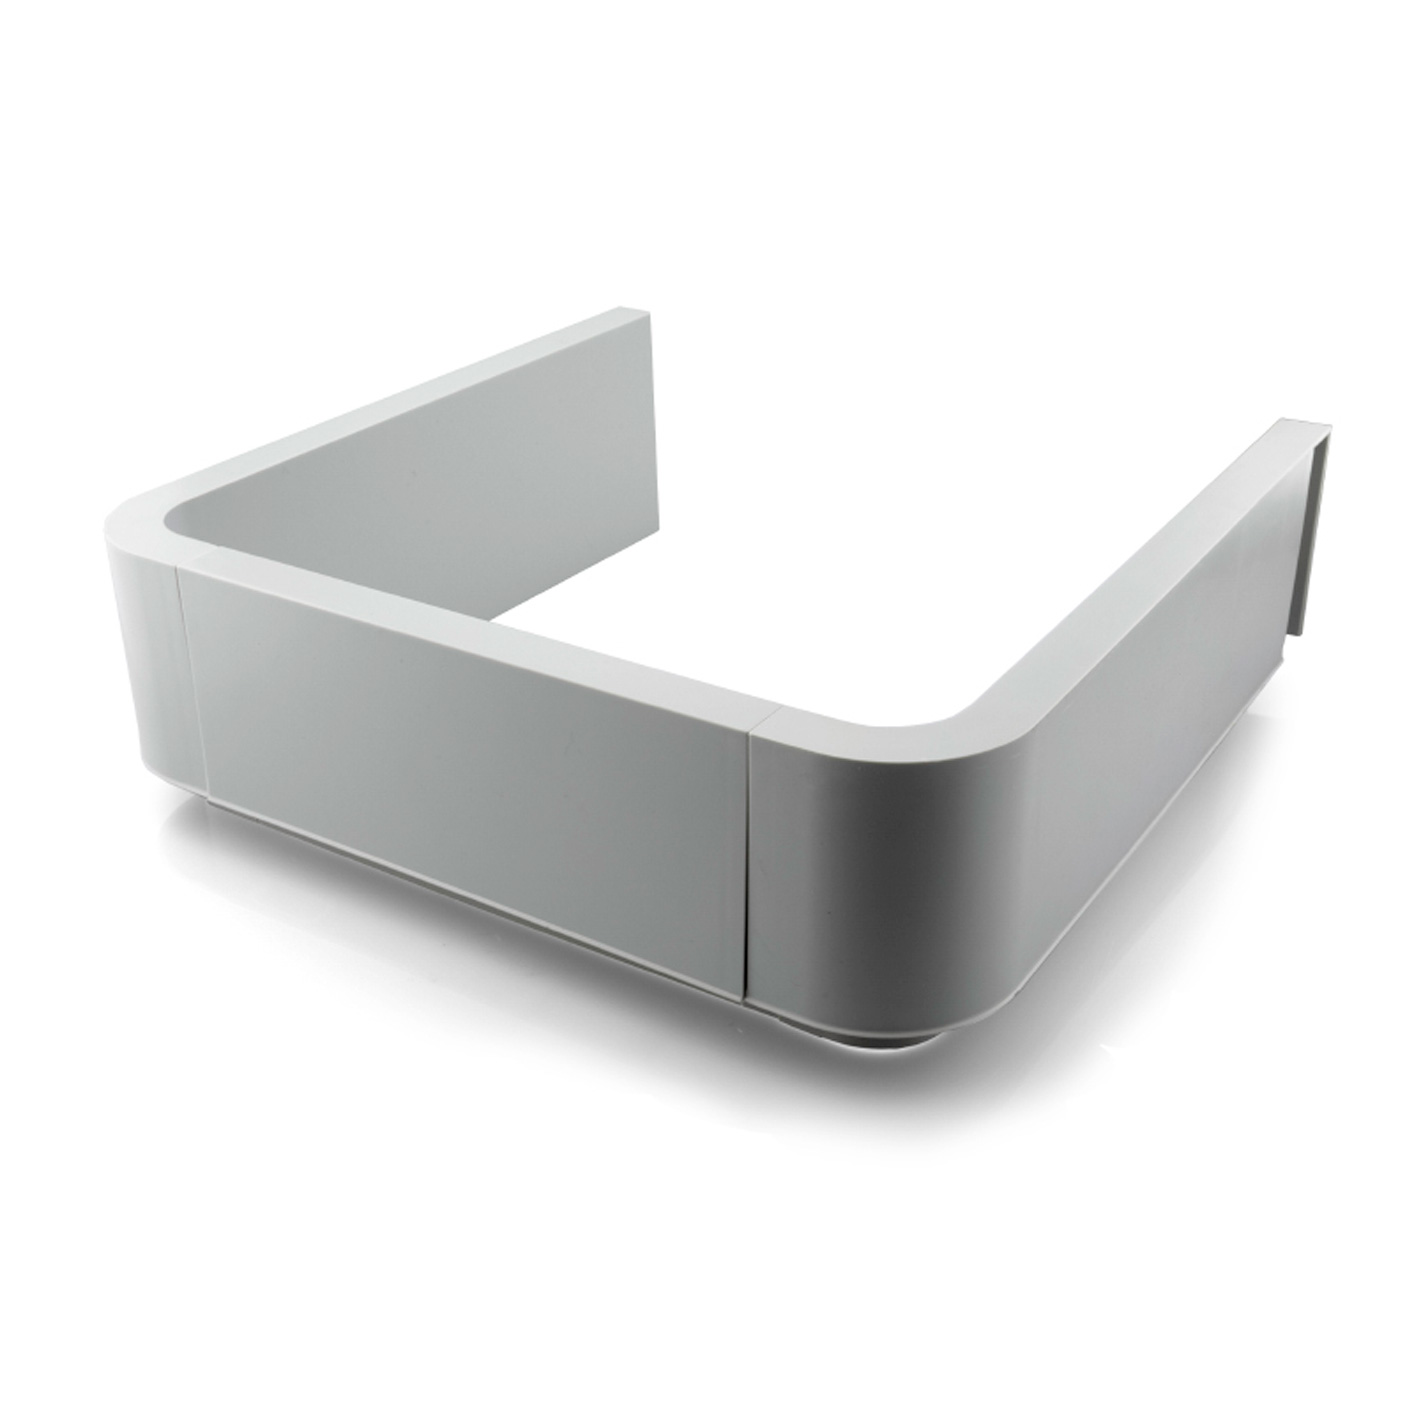 Syphon Plus Plumbing Cutout Insert for Vanity Drawers, Side Wall